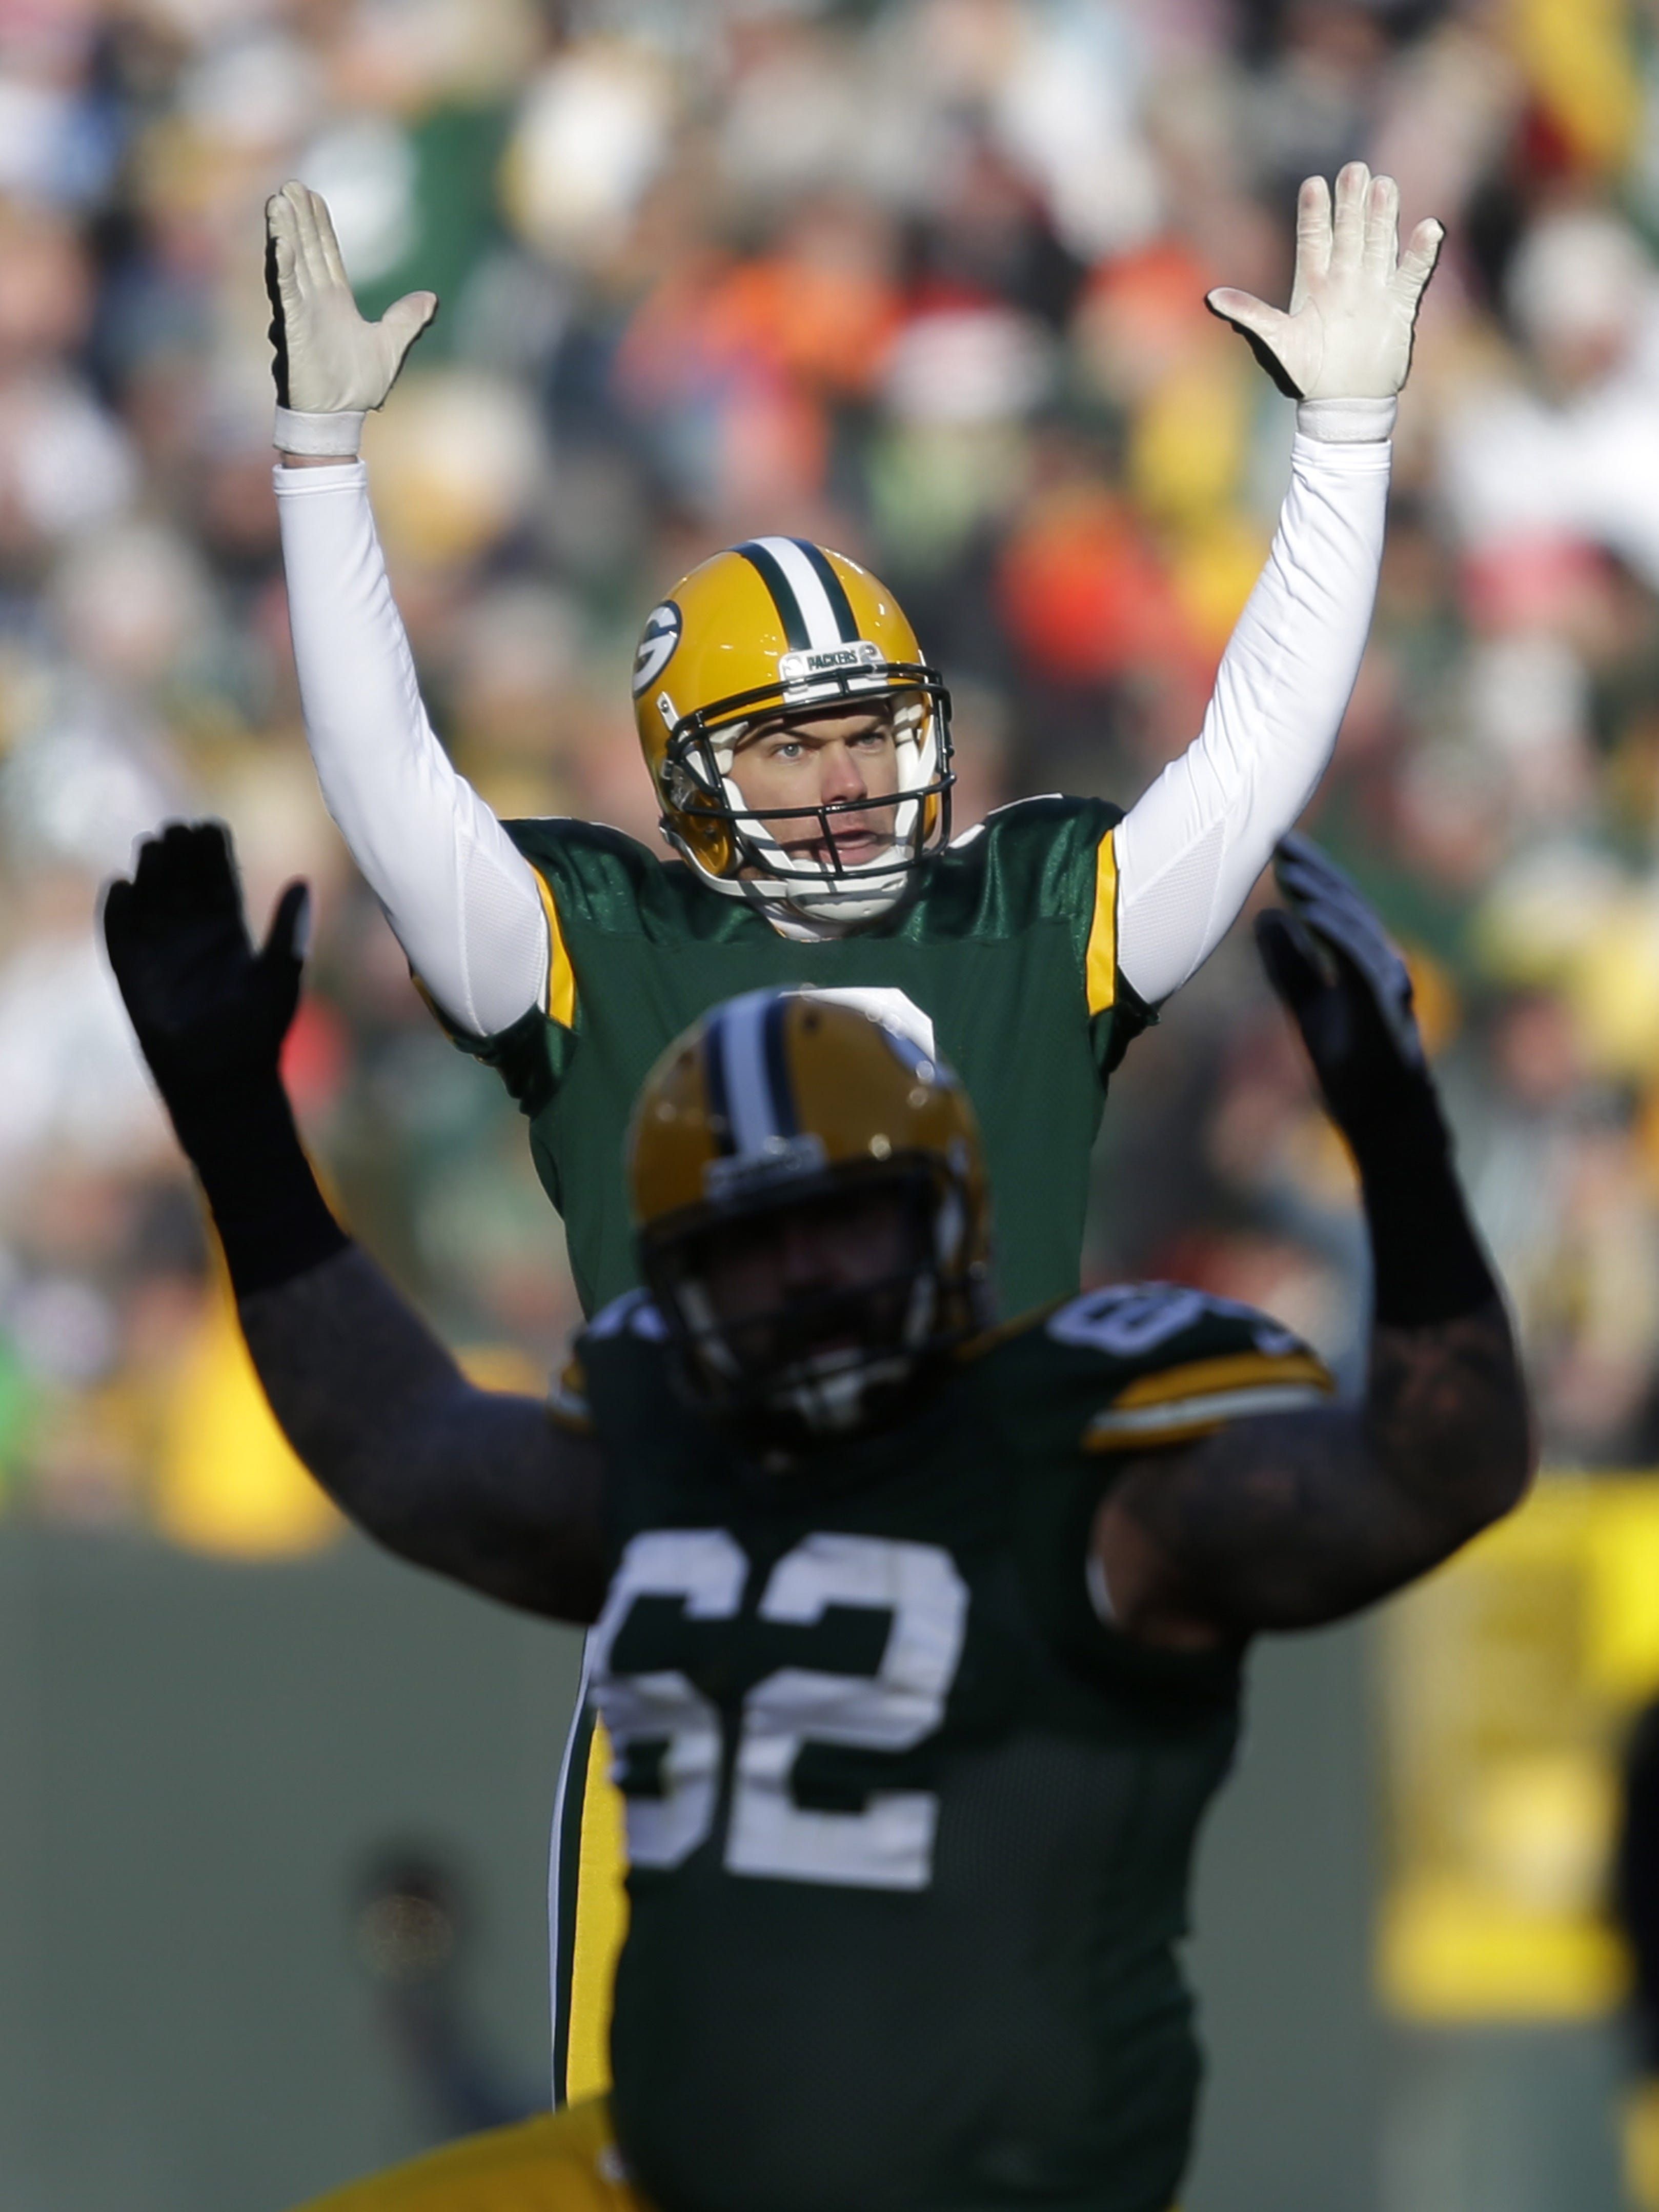 Mason Crosby celebrates making a 47-yard field goal in the second quarter against the Tennessee Titans on Dec. 23, 2012, at Lambeau Field.